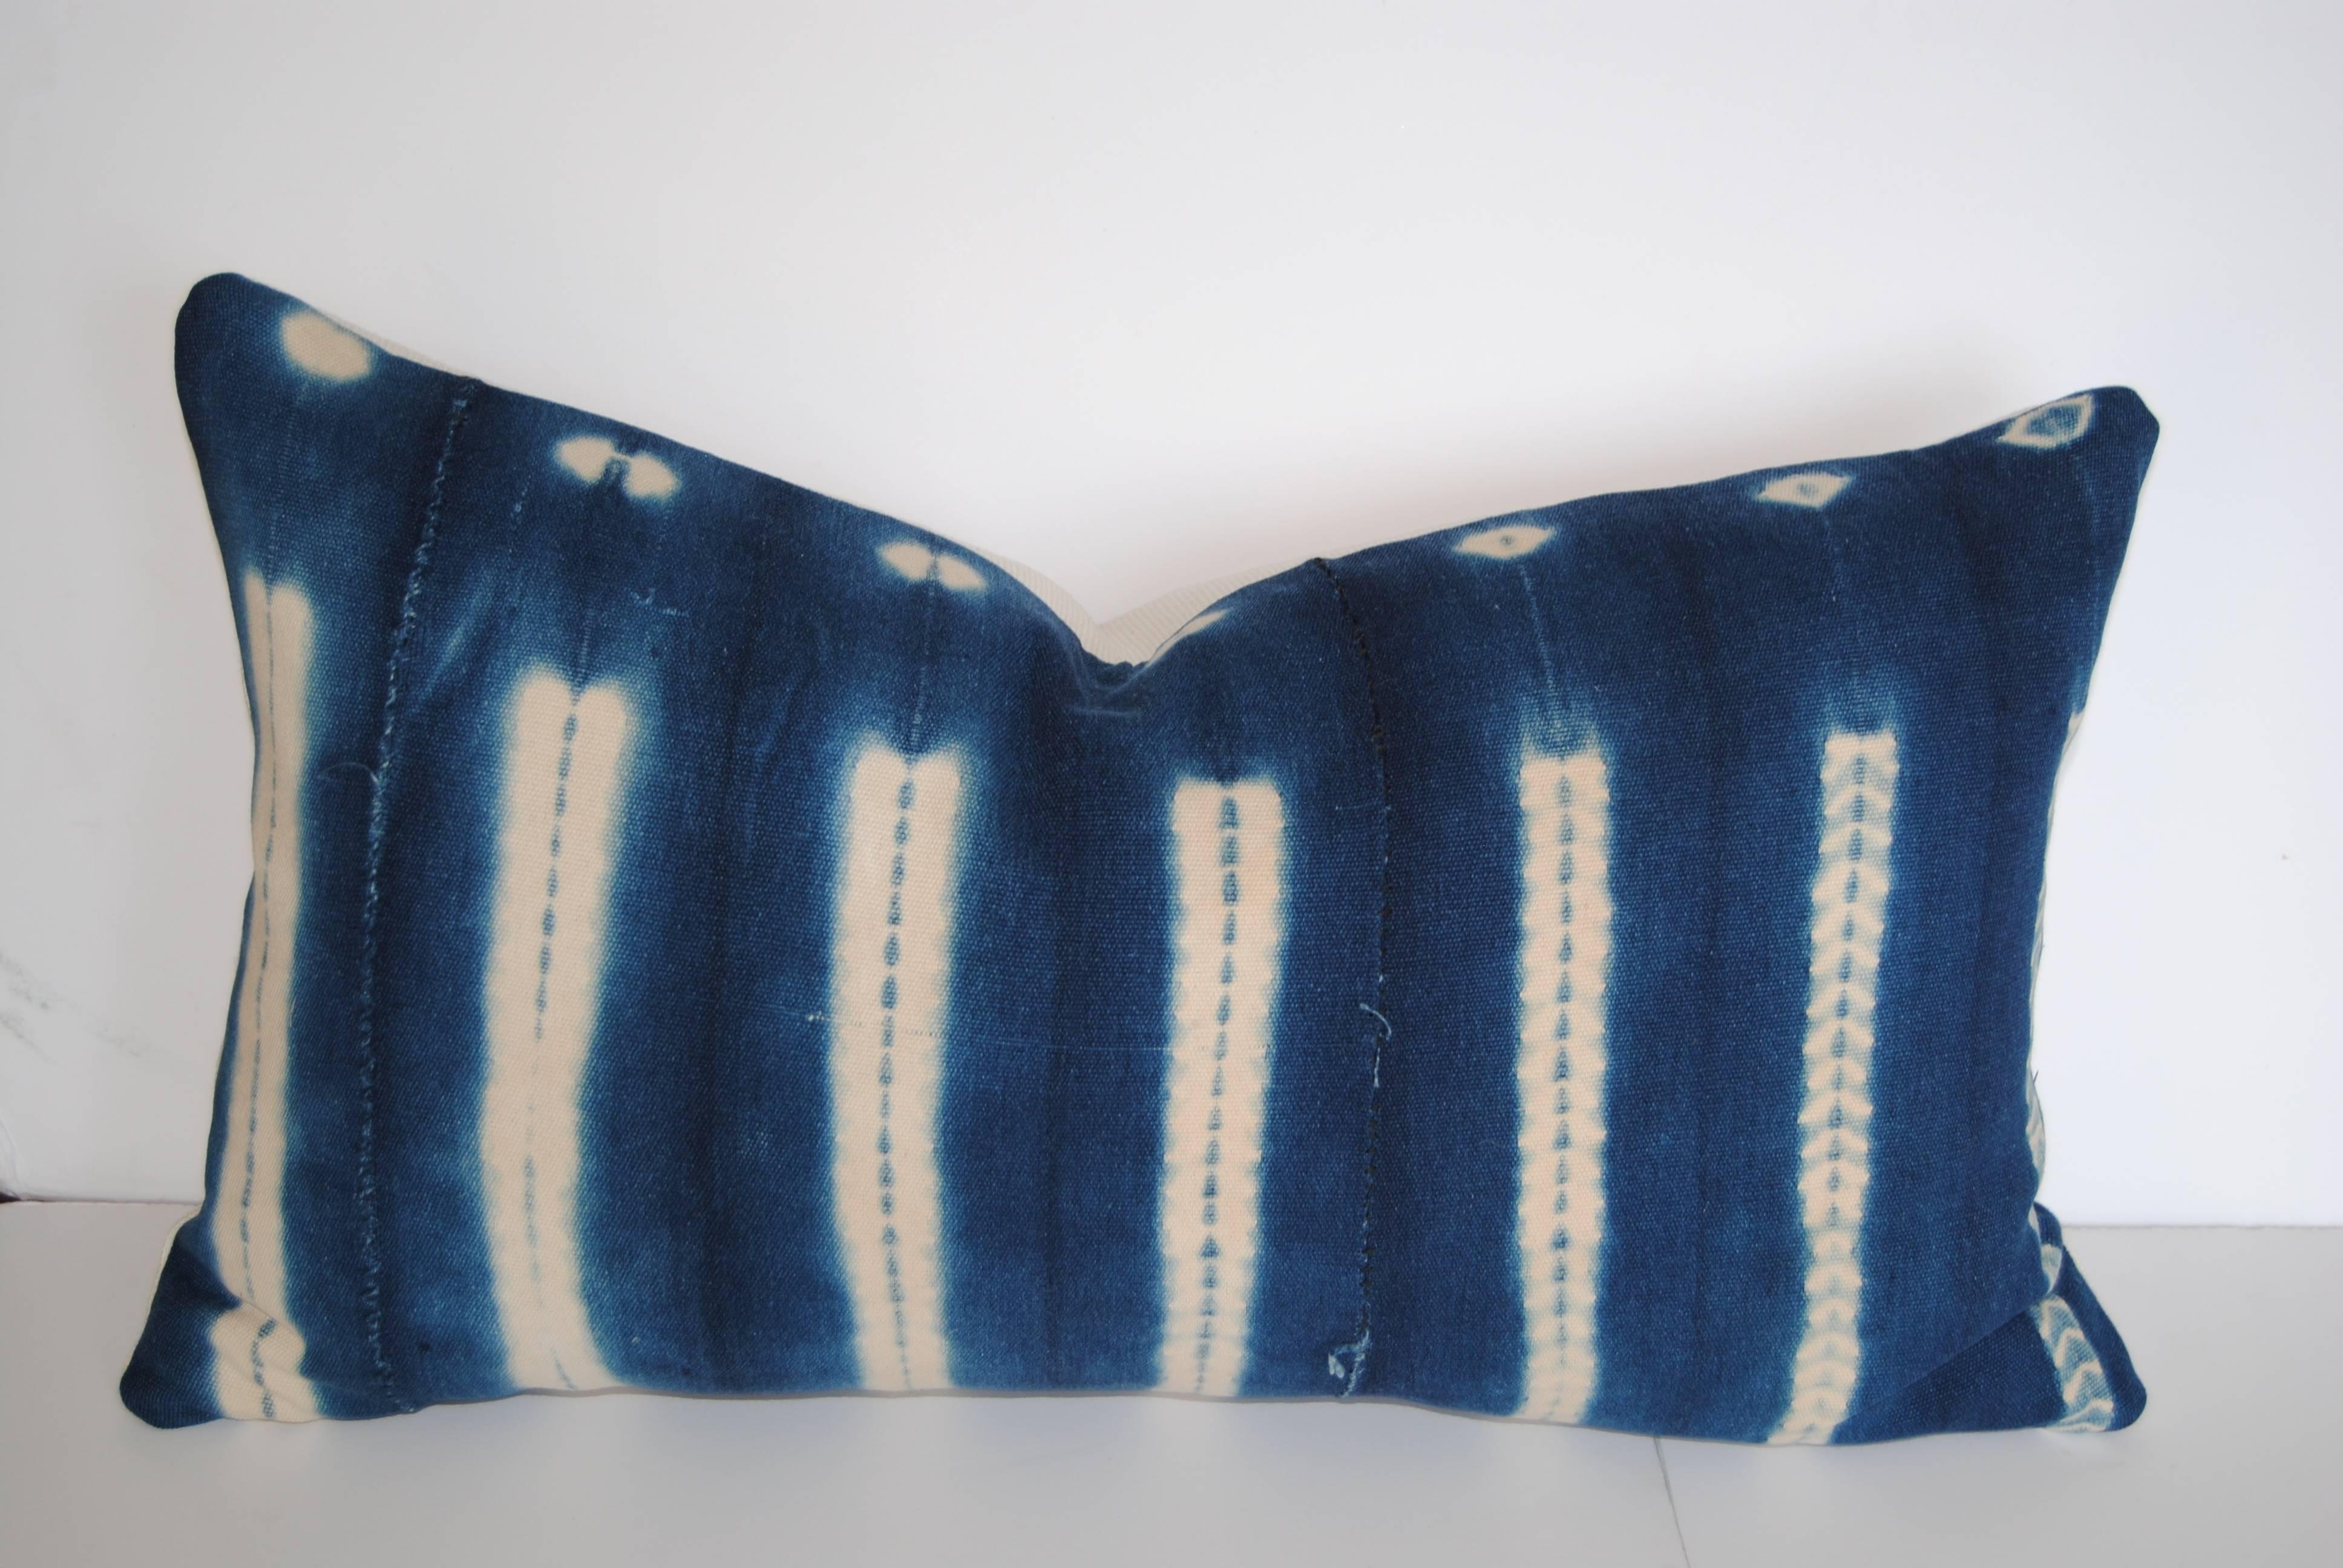 Custom pair of pillows cut from vintage African Indigo hand-loomed textiles. From Mali. The textile is woven in 10